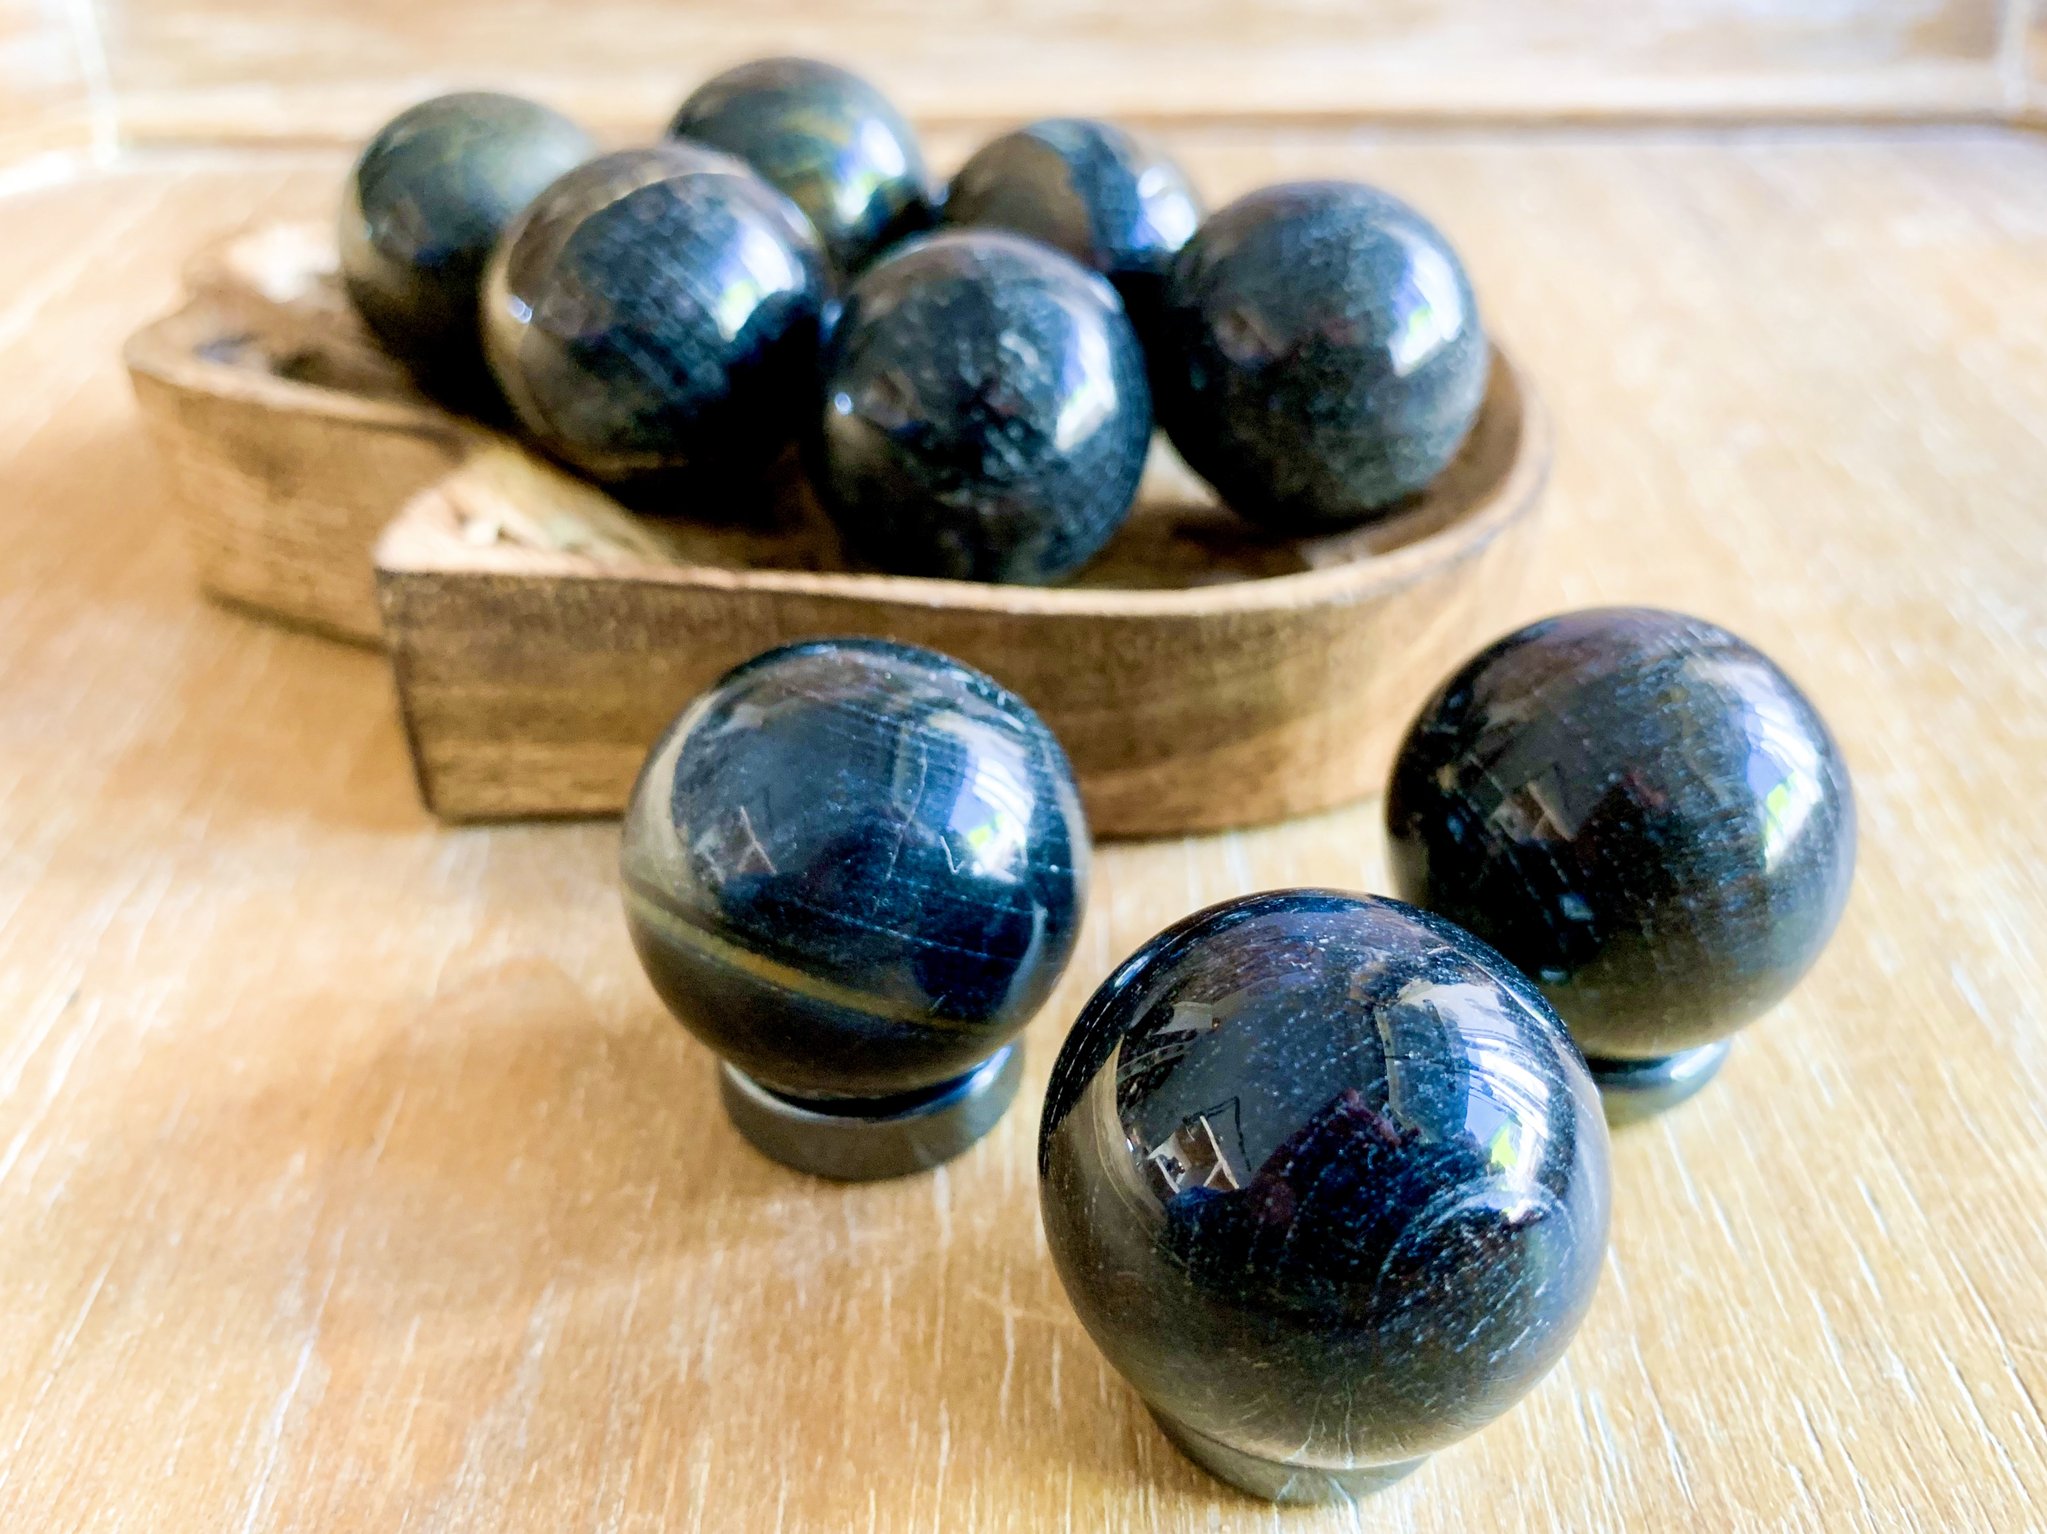 Blue Tigers Eye Meanings, Properties and Uses